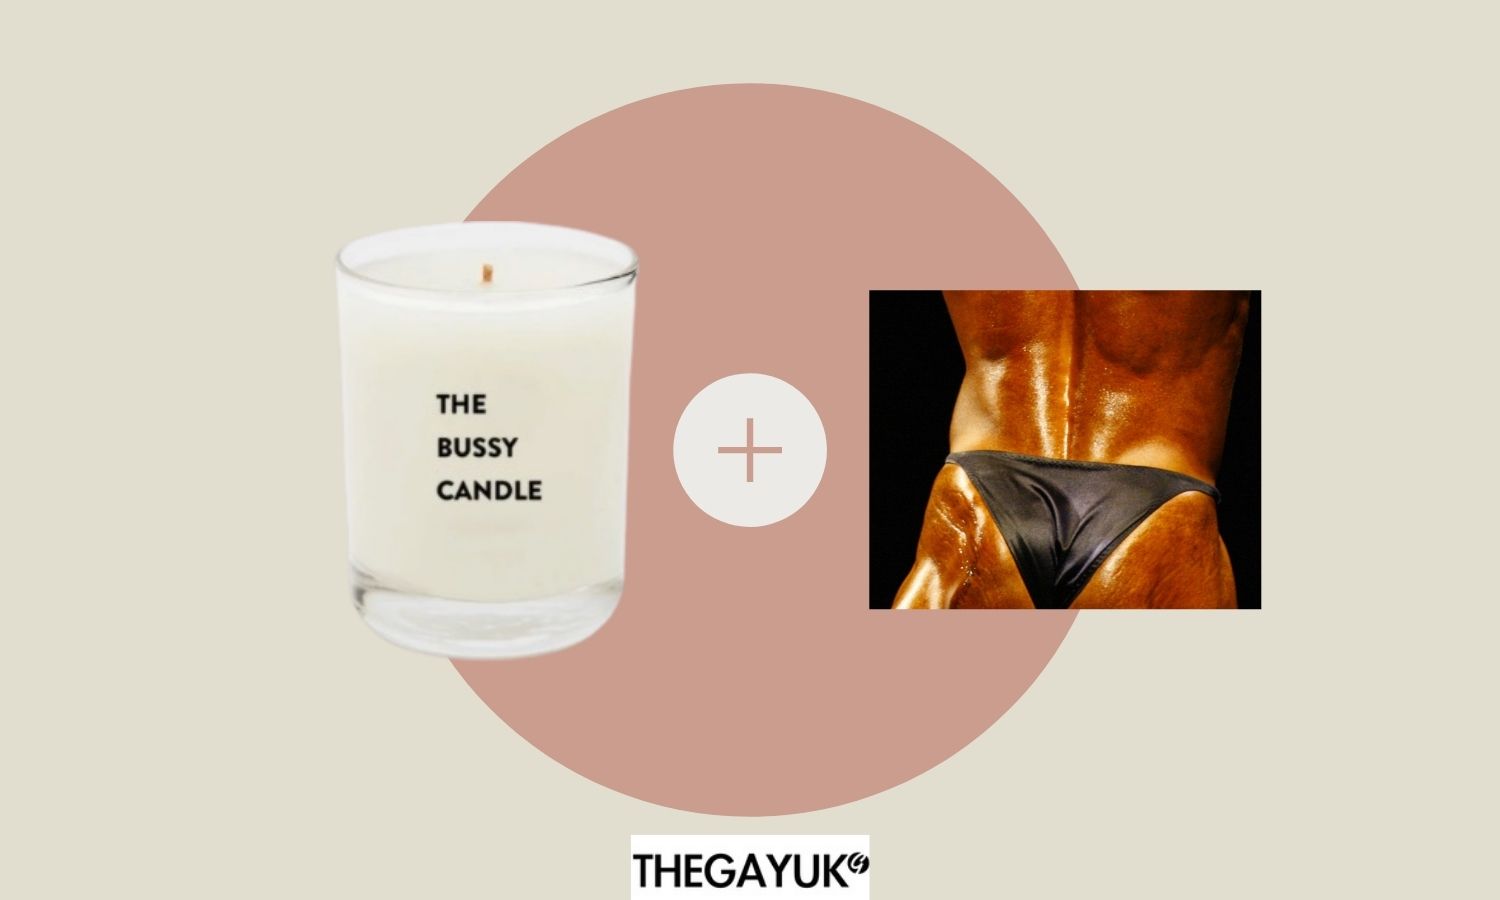 There’s a candle on sale that apparently smells of man’s butt